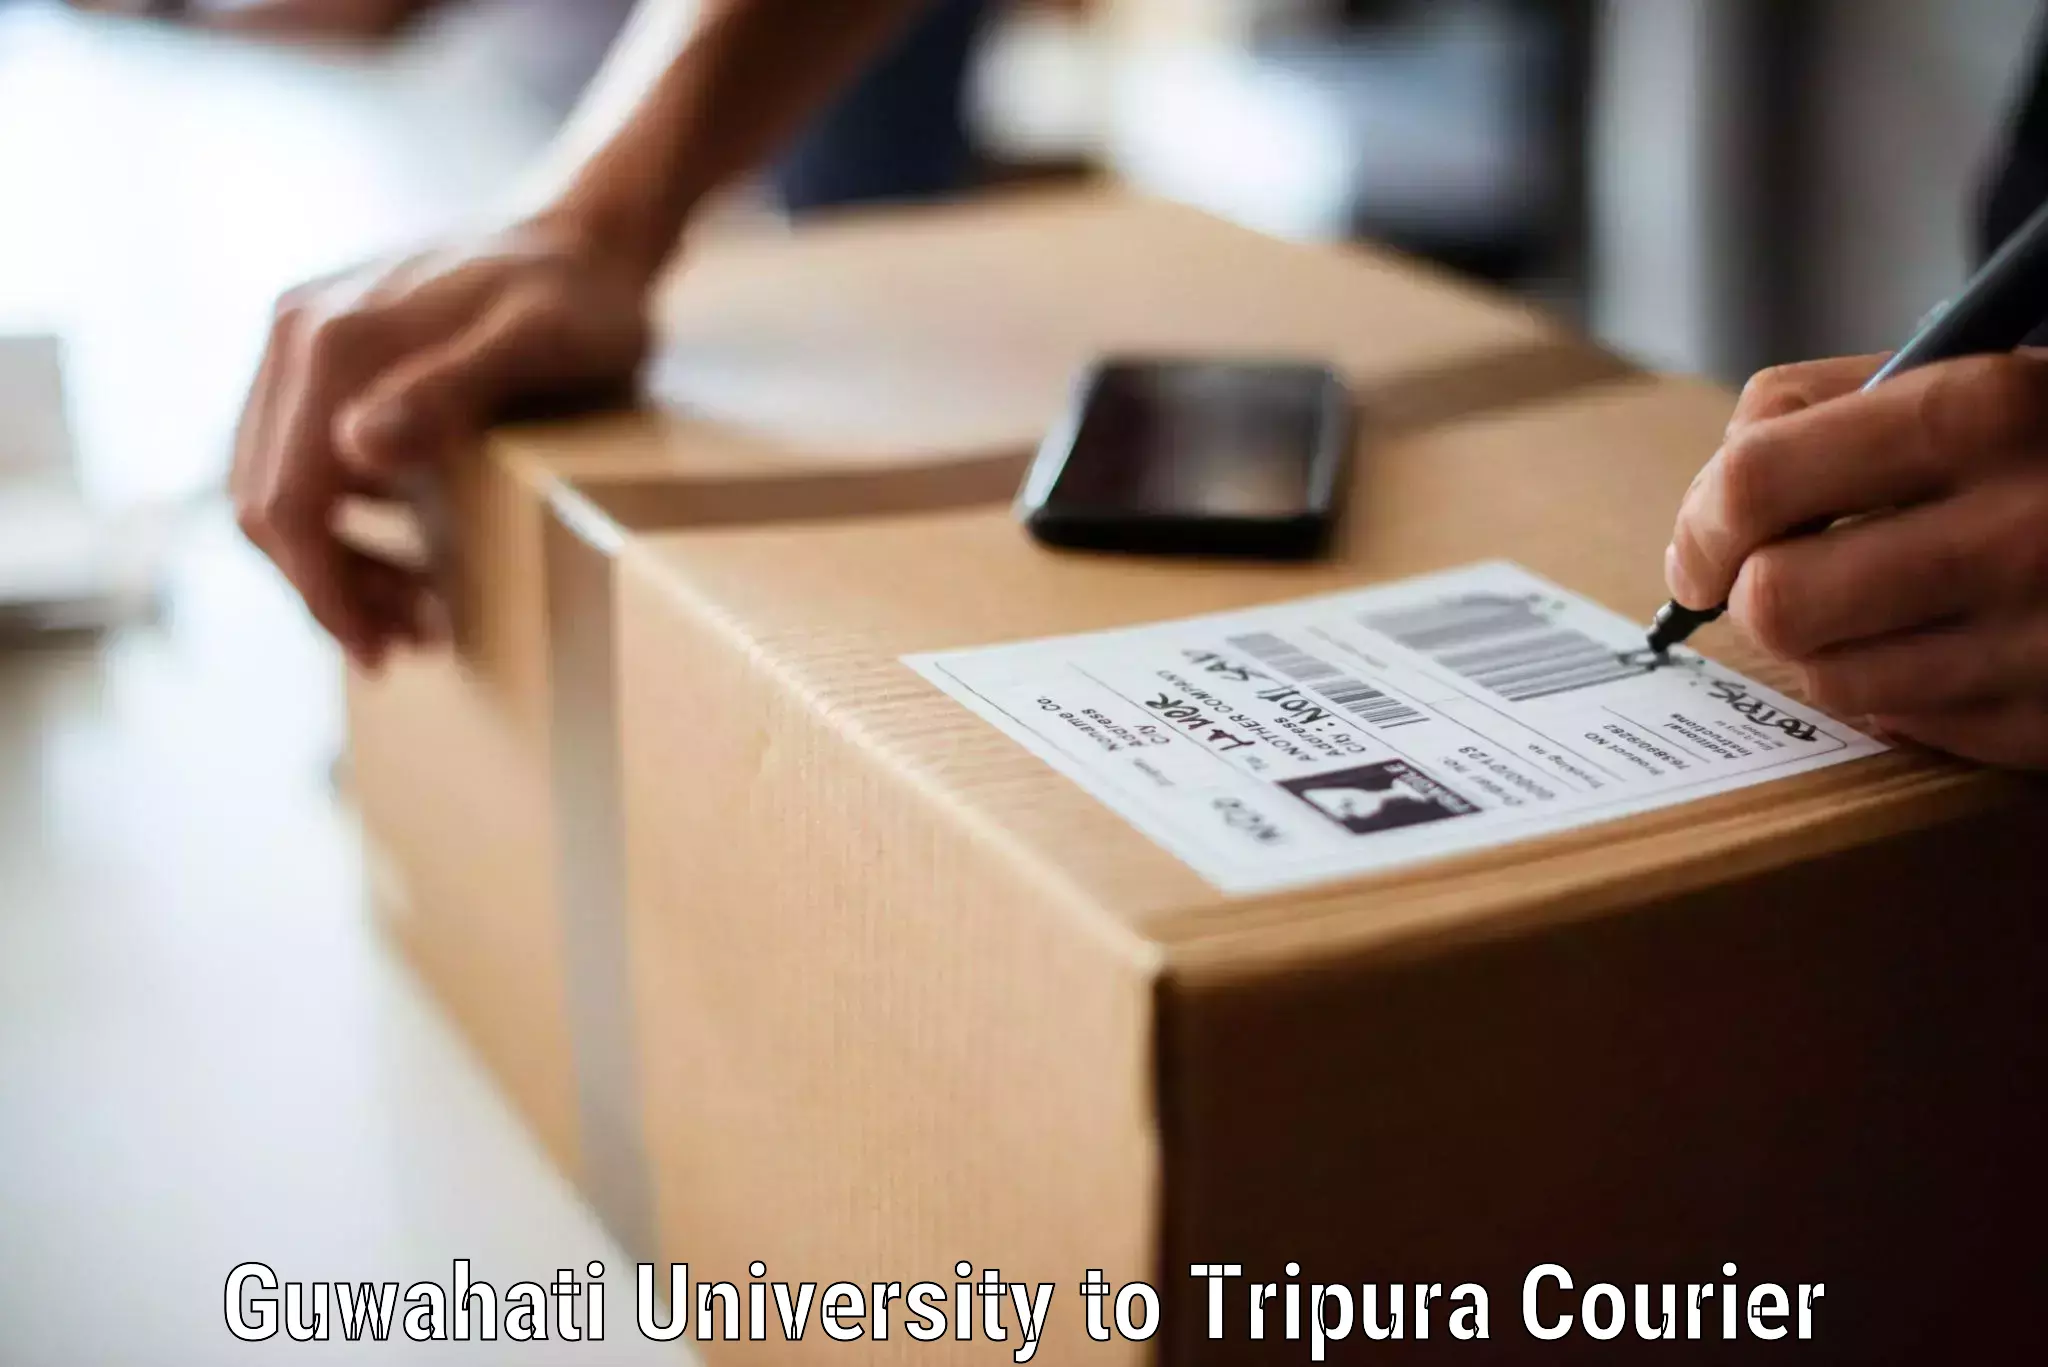 Furniture delivery service Guwahati University to West Tripura